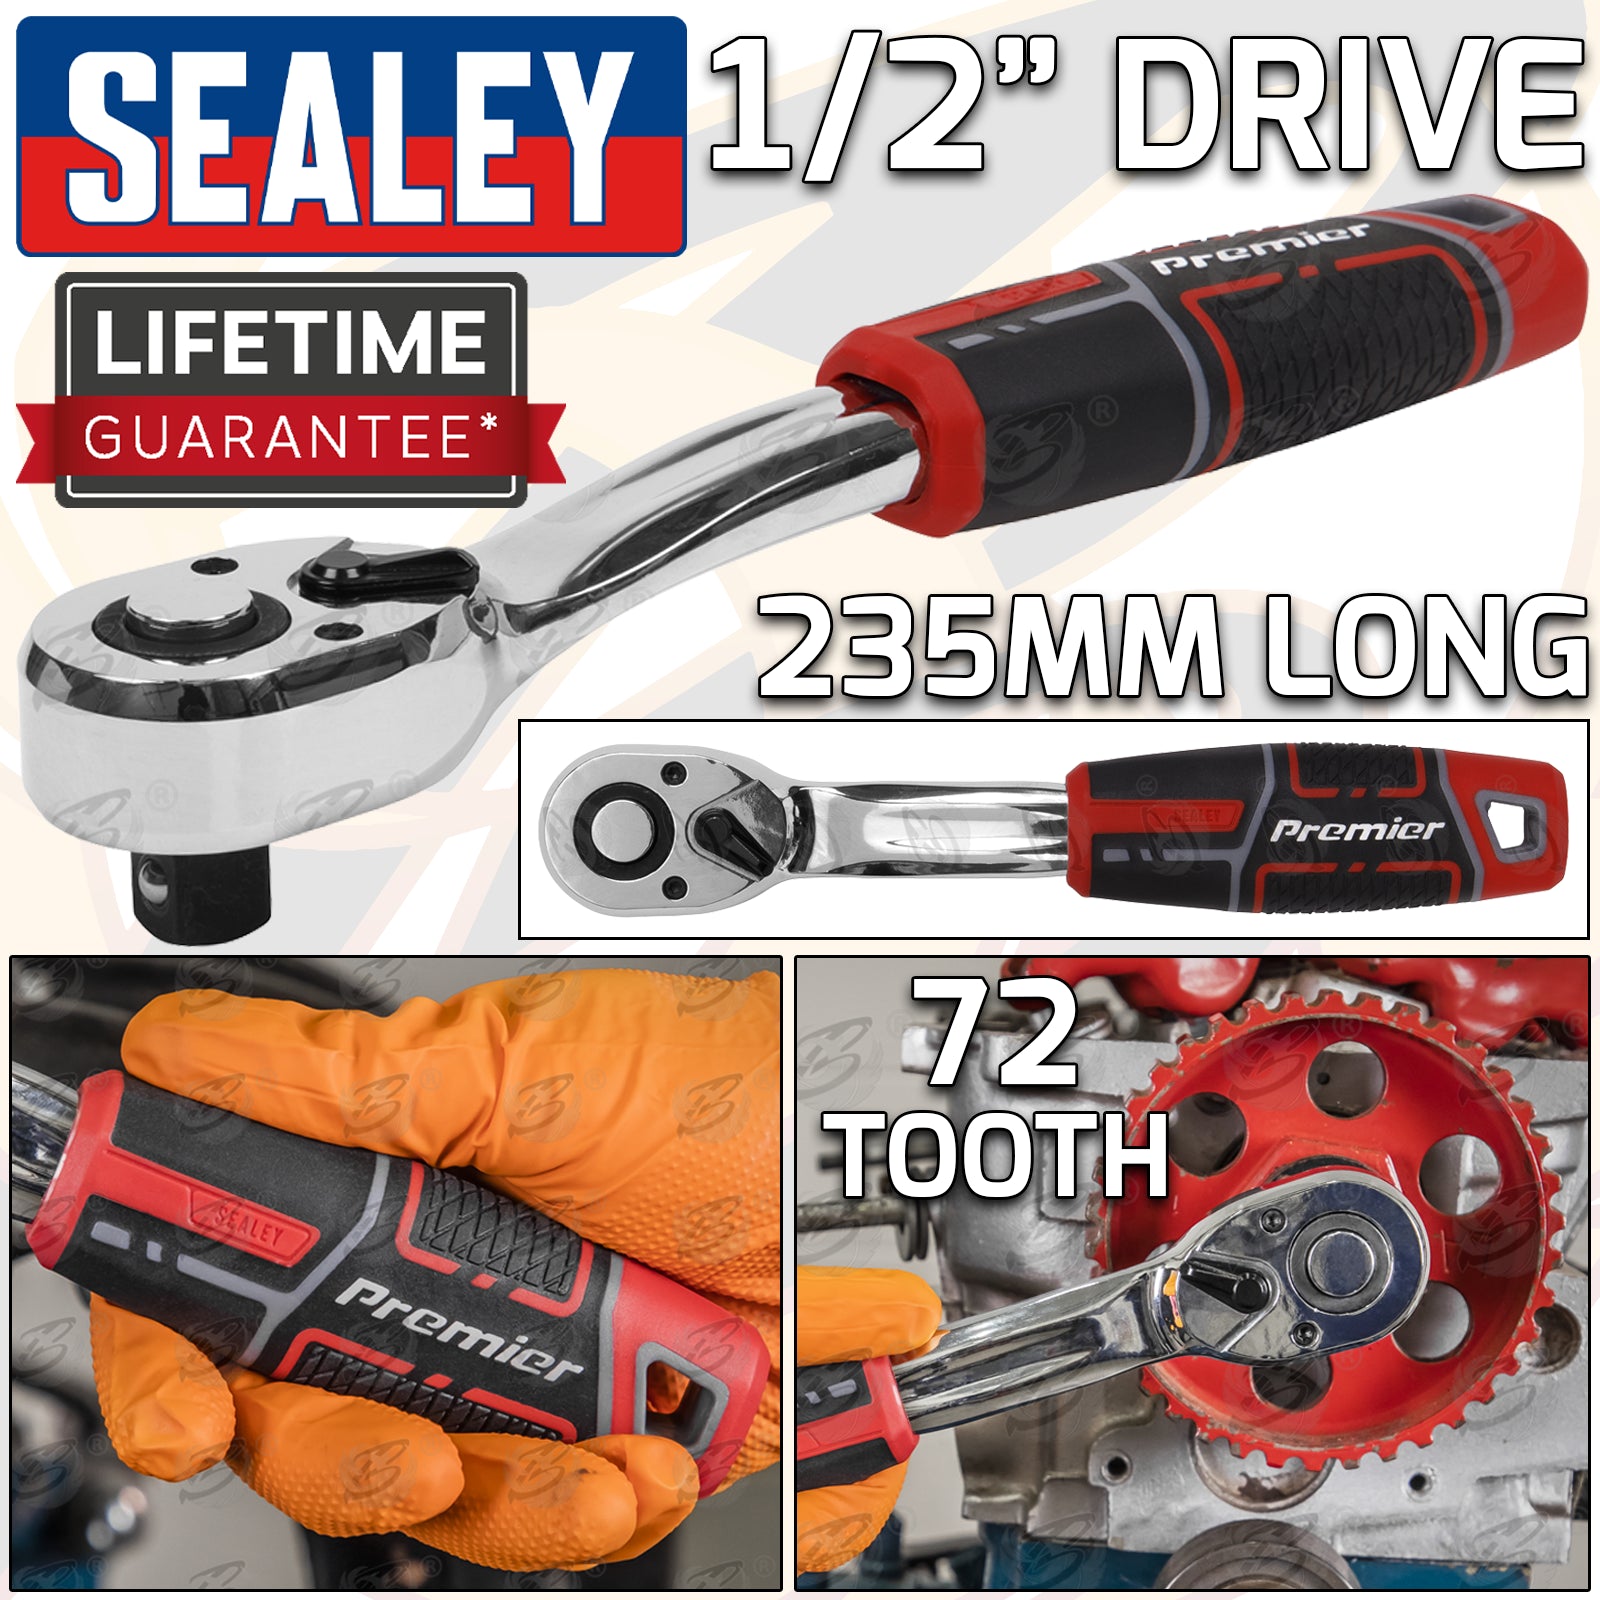 SEALEY 1/2" DRIVE 72 TOOTH CURVED RATCHET